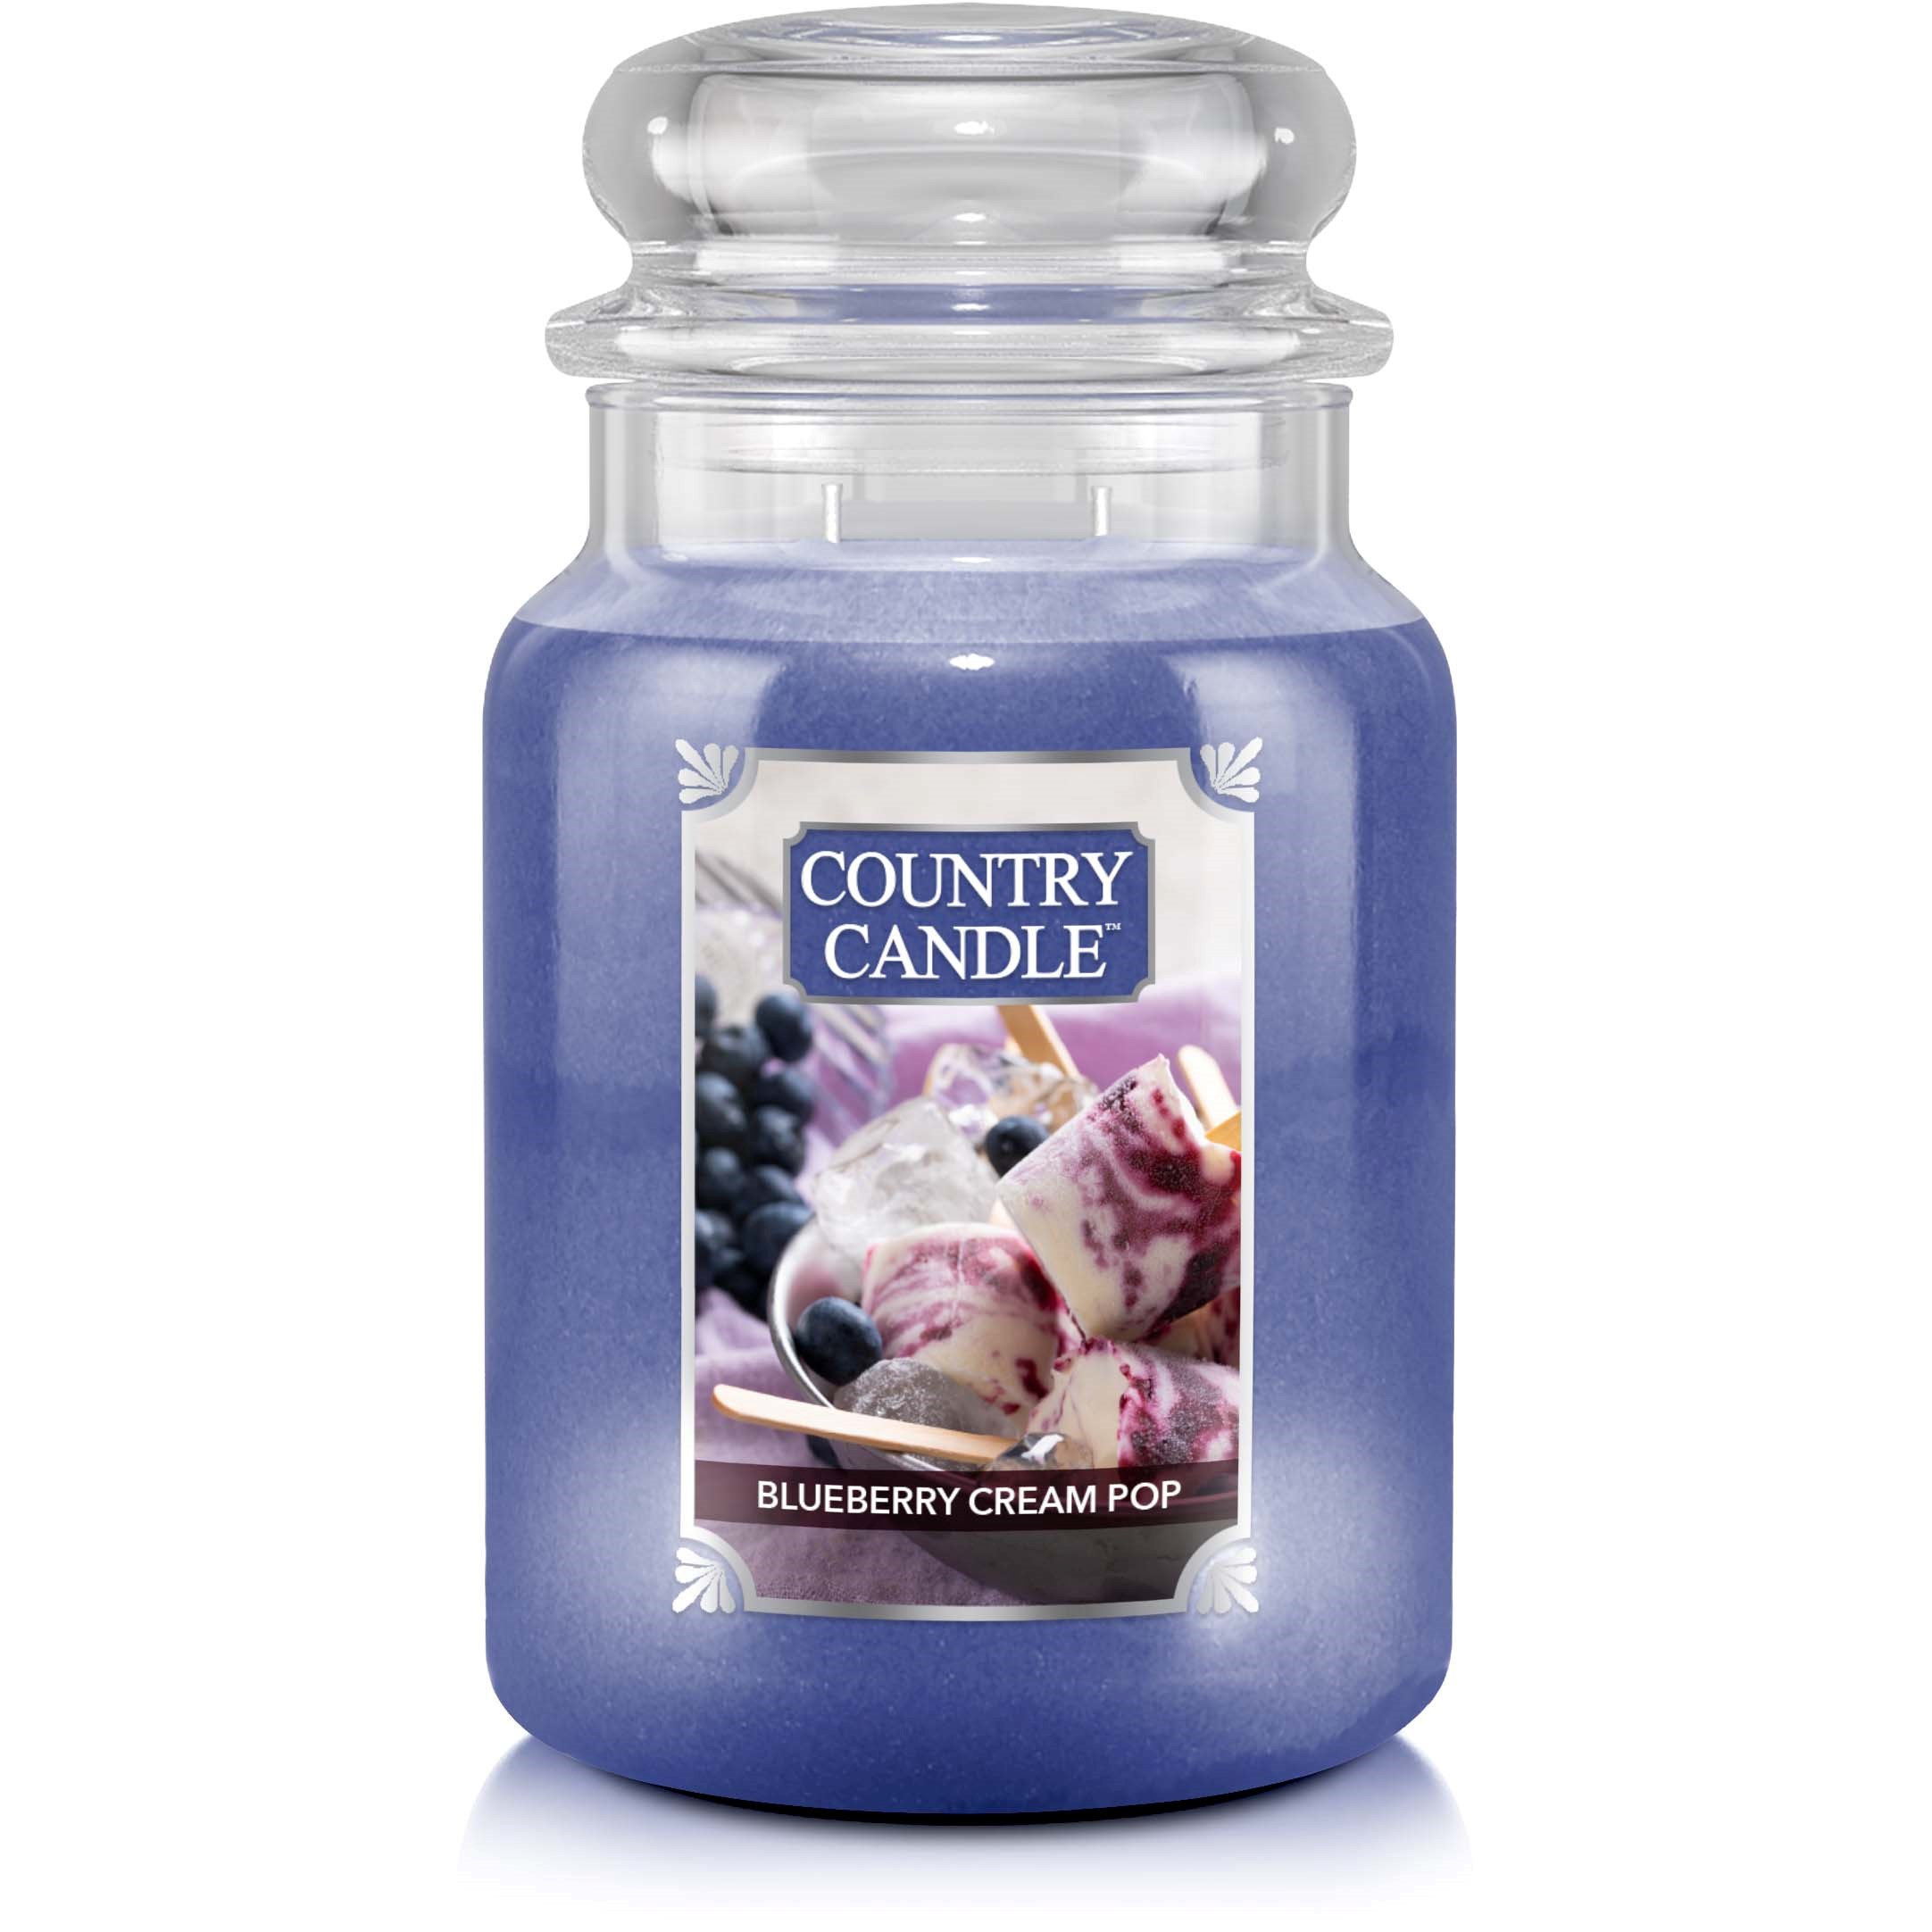 Country Candle Large Jar Blueberry Cream Pop 652 g